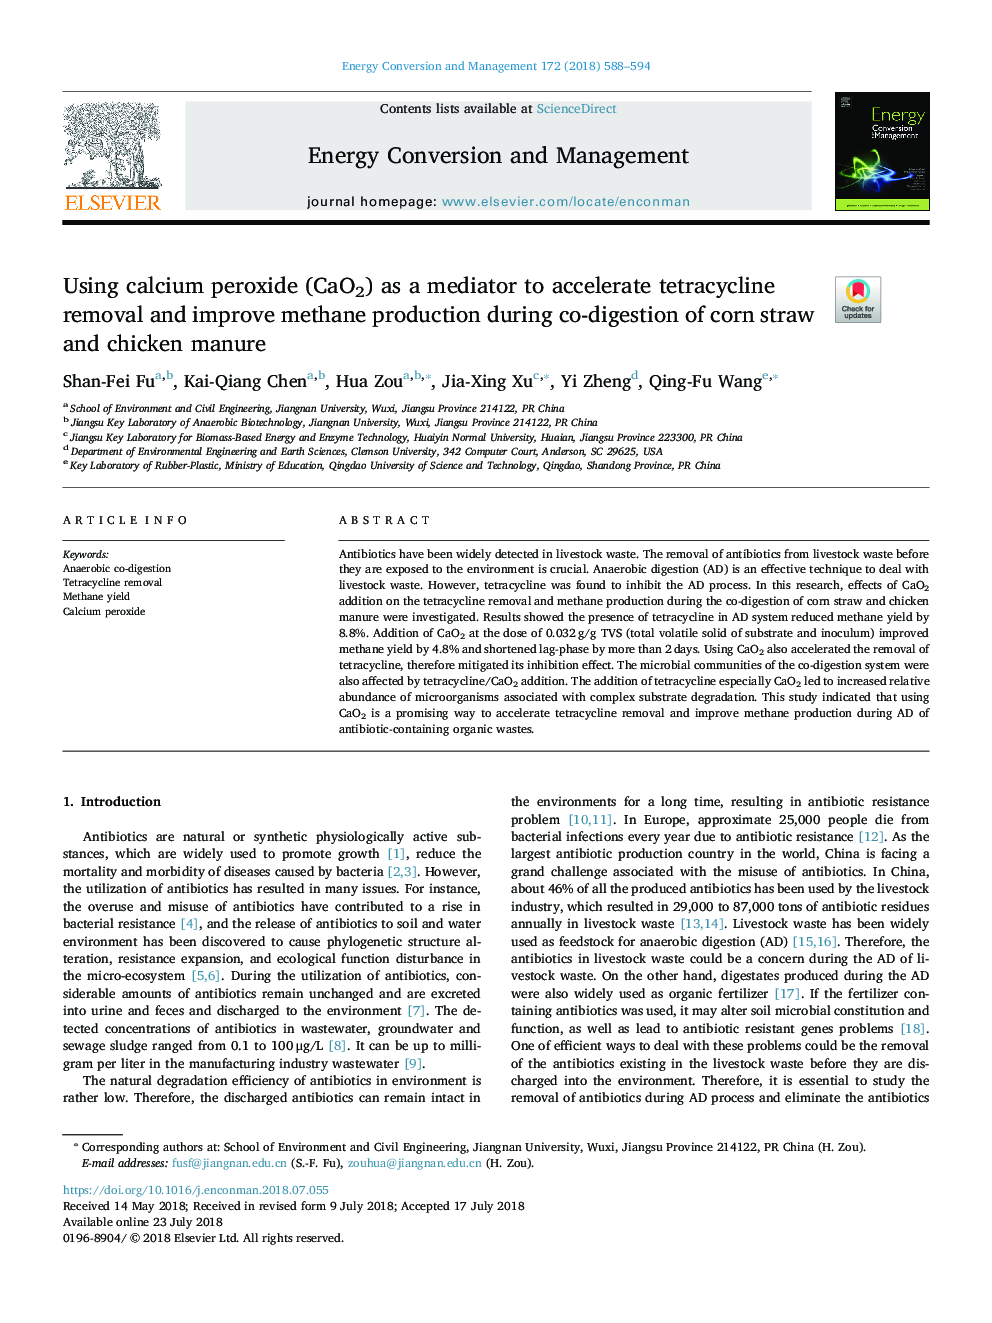 Using calcium peroxide (CaO2) as a mediator to accelerate tetracycline removal and improve methane production during co-digestion of corn straw and chicken manure